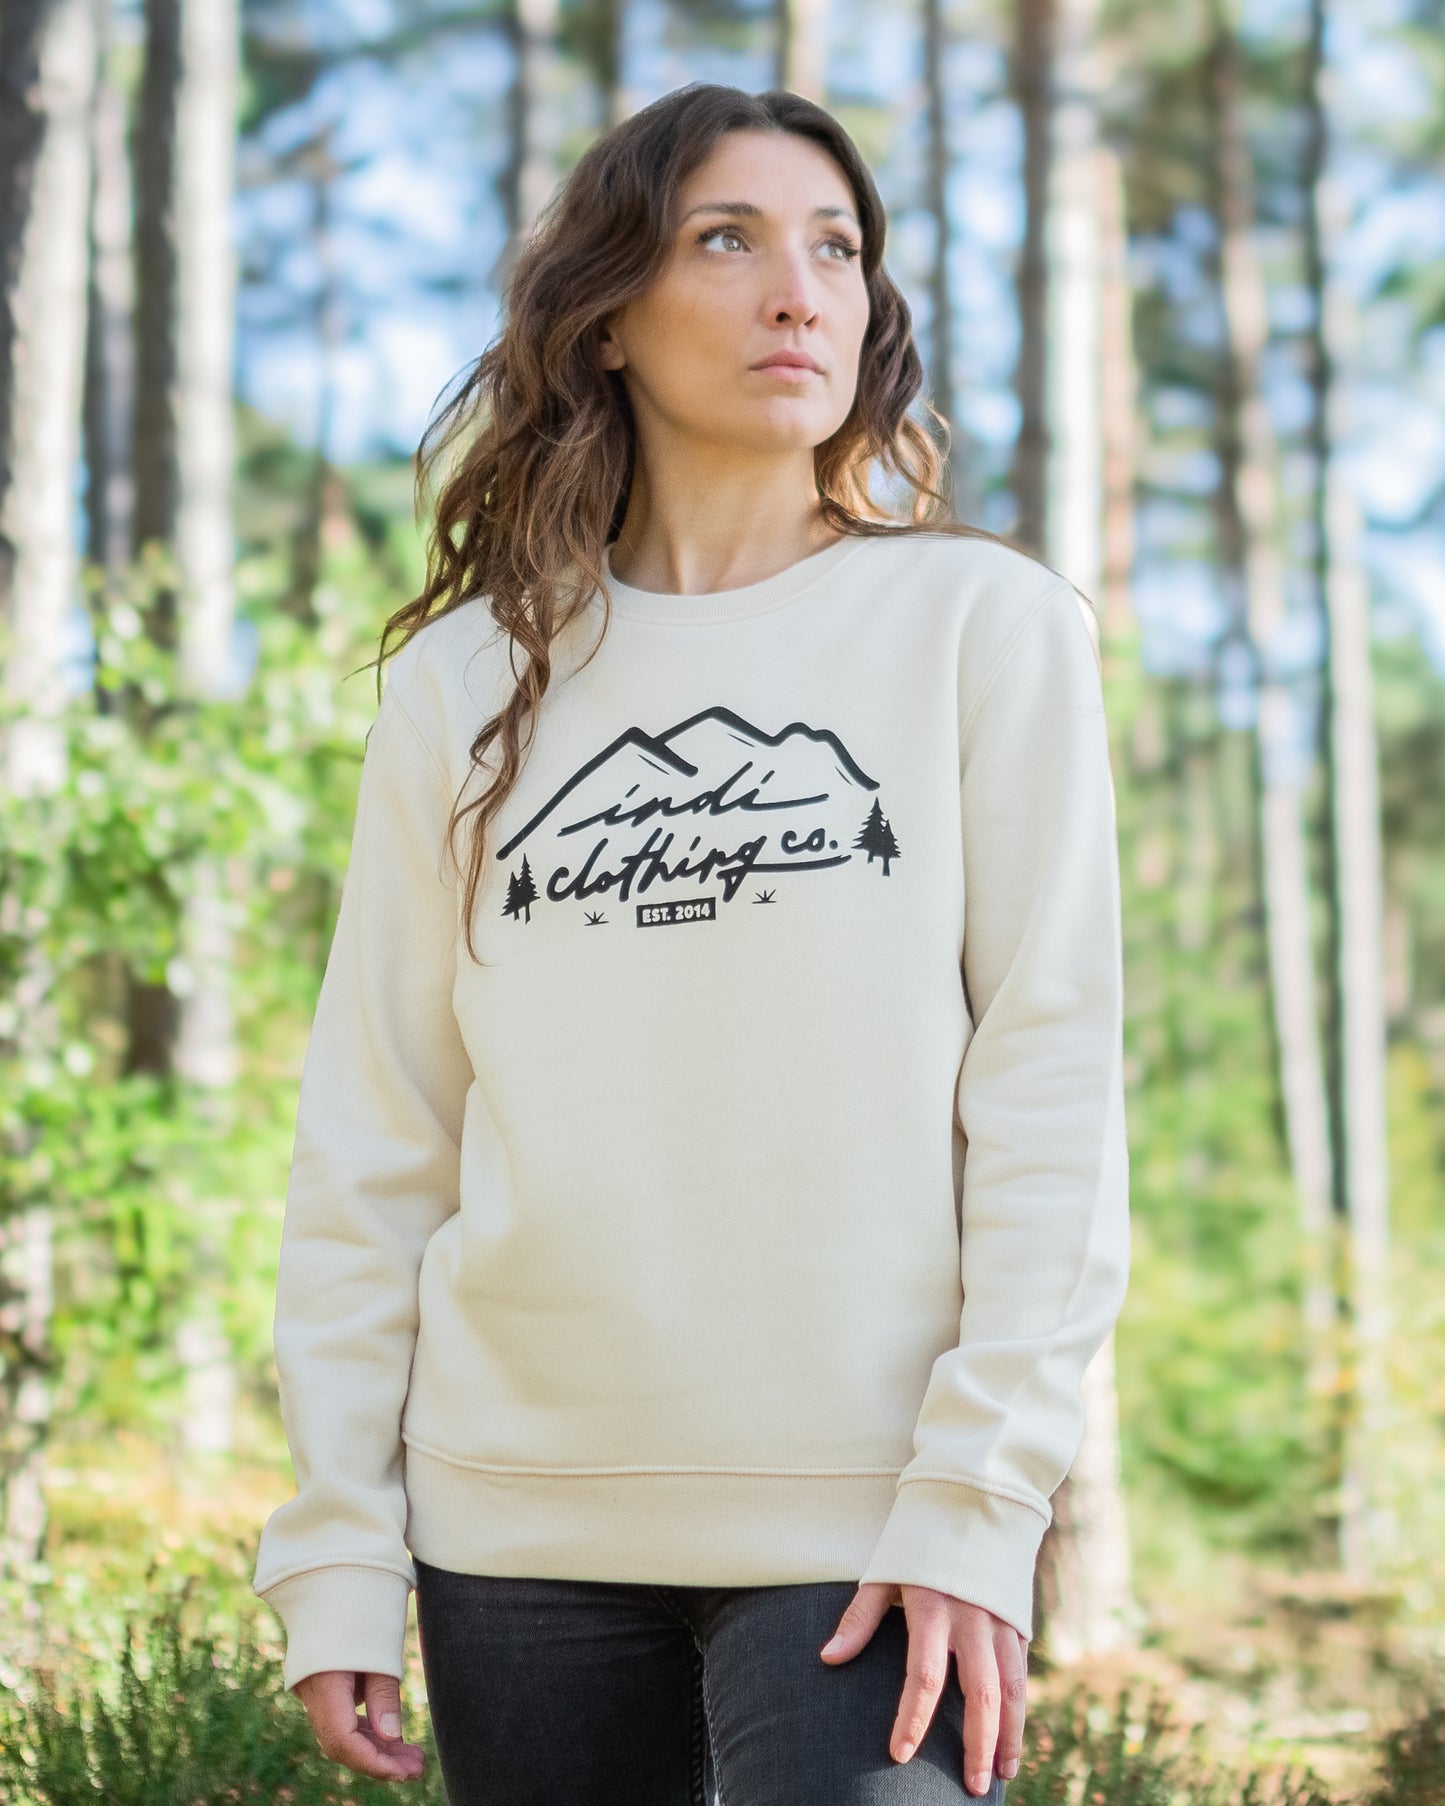 The Mountainscape Deluxe Sweater in Natural Raw